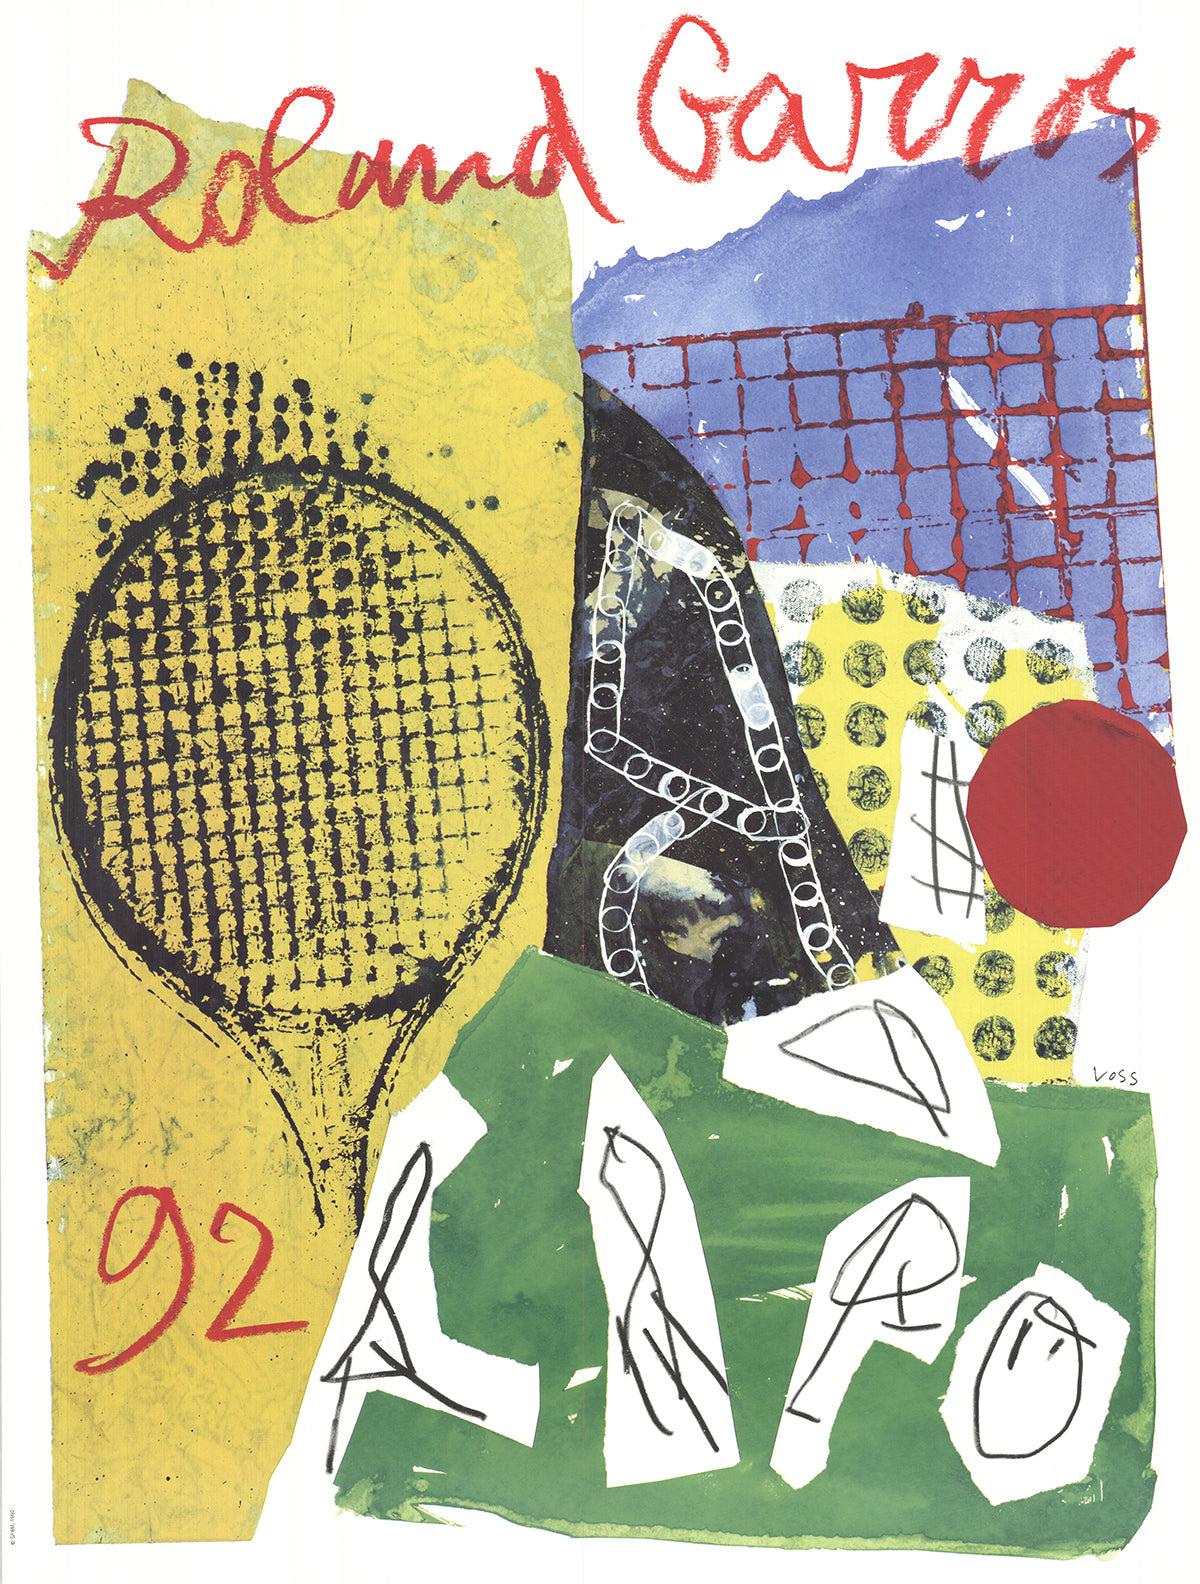 Paper Size: 29.5 x 22.5 inches ( 74.93 x 57.15 cm )
Image Size: 29.5 x 22.5 inches ( 74.93 x 57.15 cm )
Framed: No
Condition: A: Mint

Additional Details: Official poster designed and created for the tennis tournament held at Roland Garros French